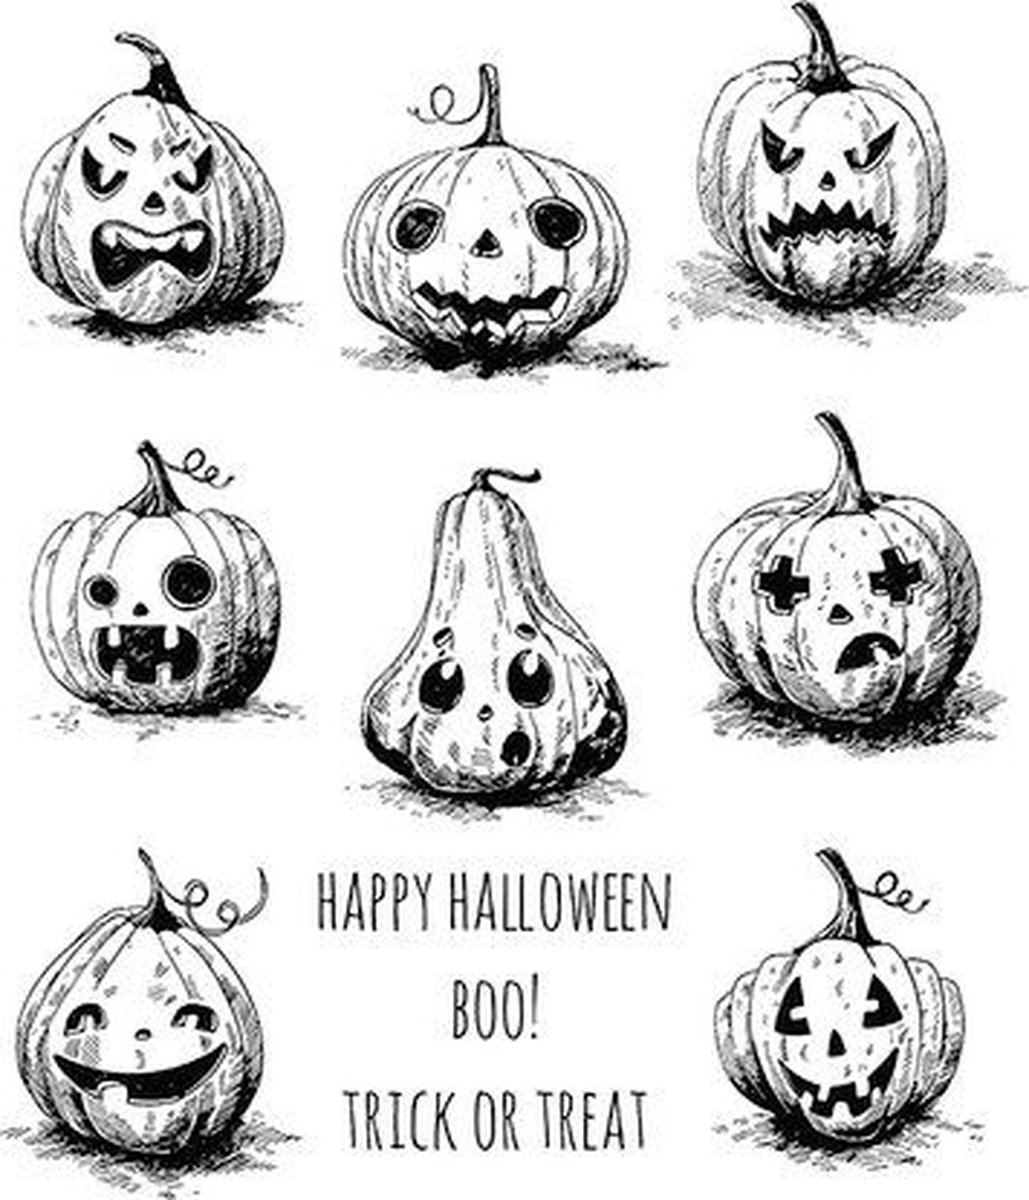 Cling Stamps Pumkinhead (CMS309)